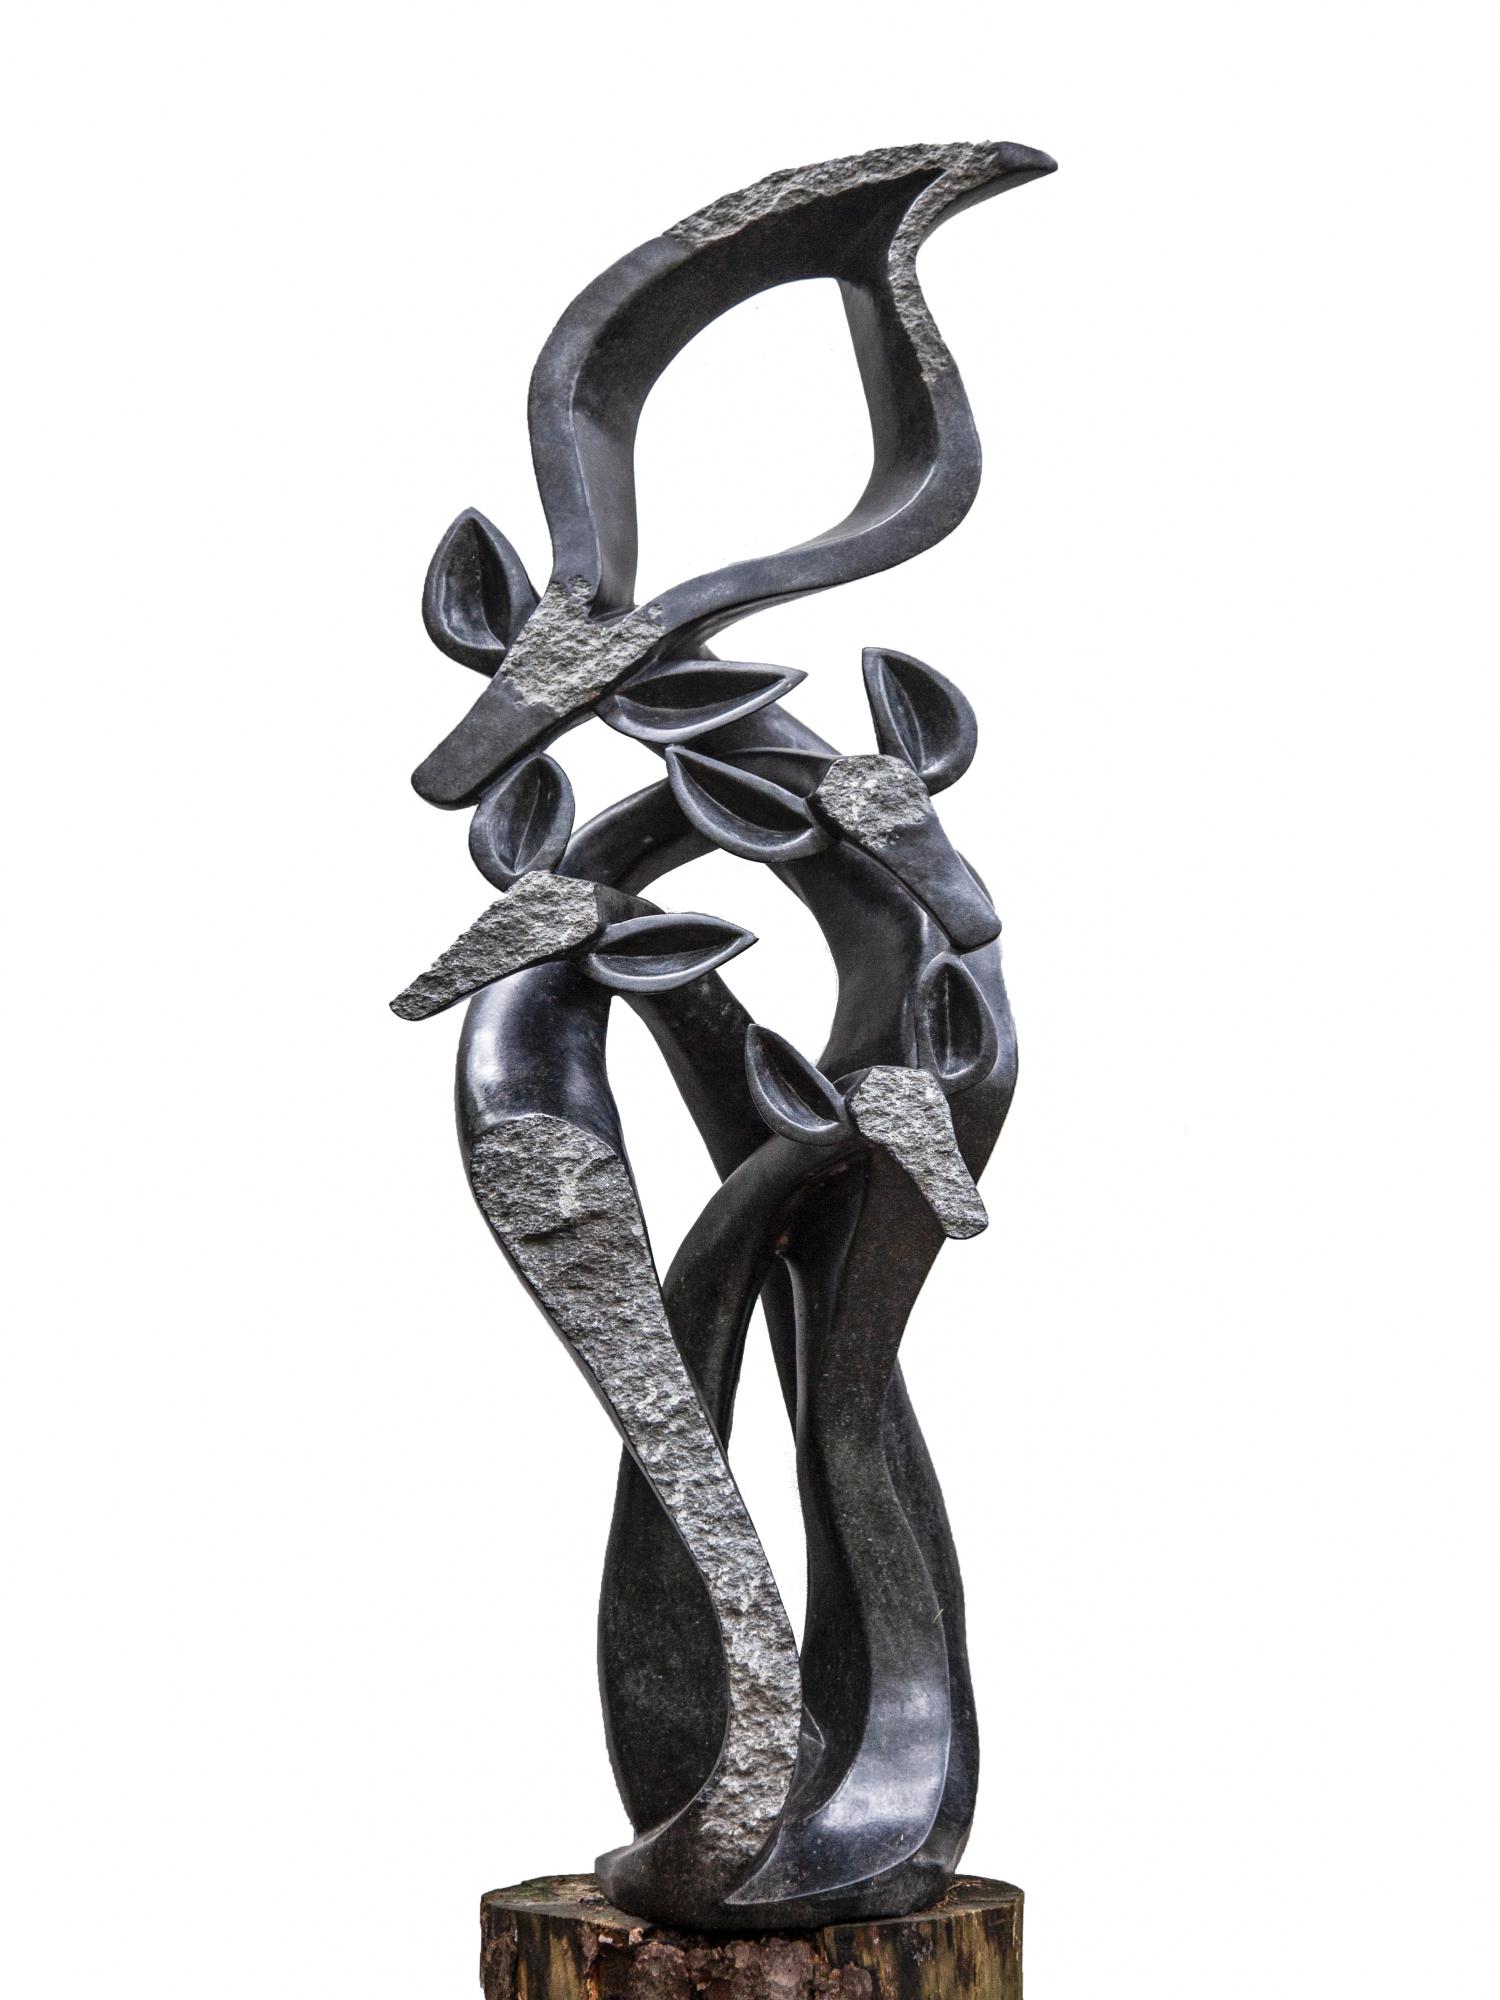 Sculpture: Fungai Dodzo Stronger together Springstone Signed Unique 172cm high by 55cm wide by